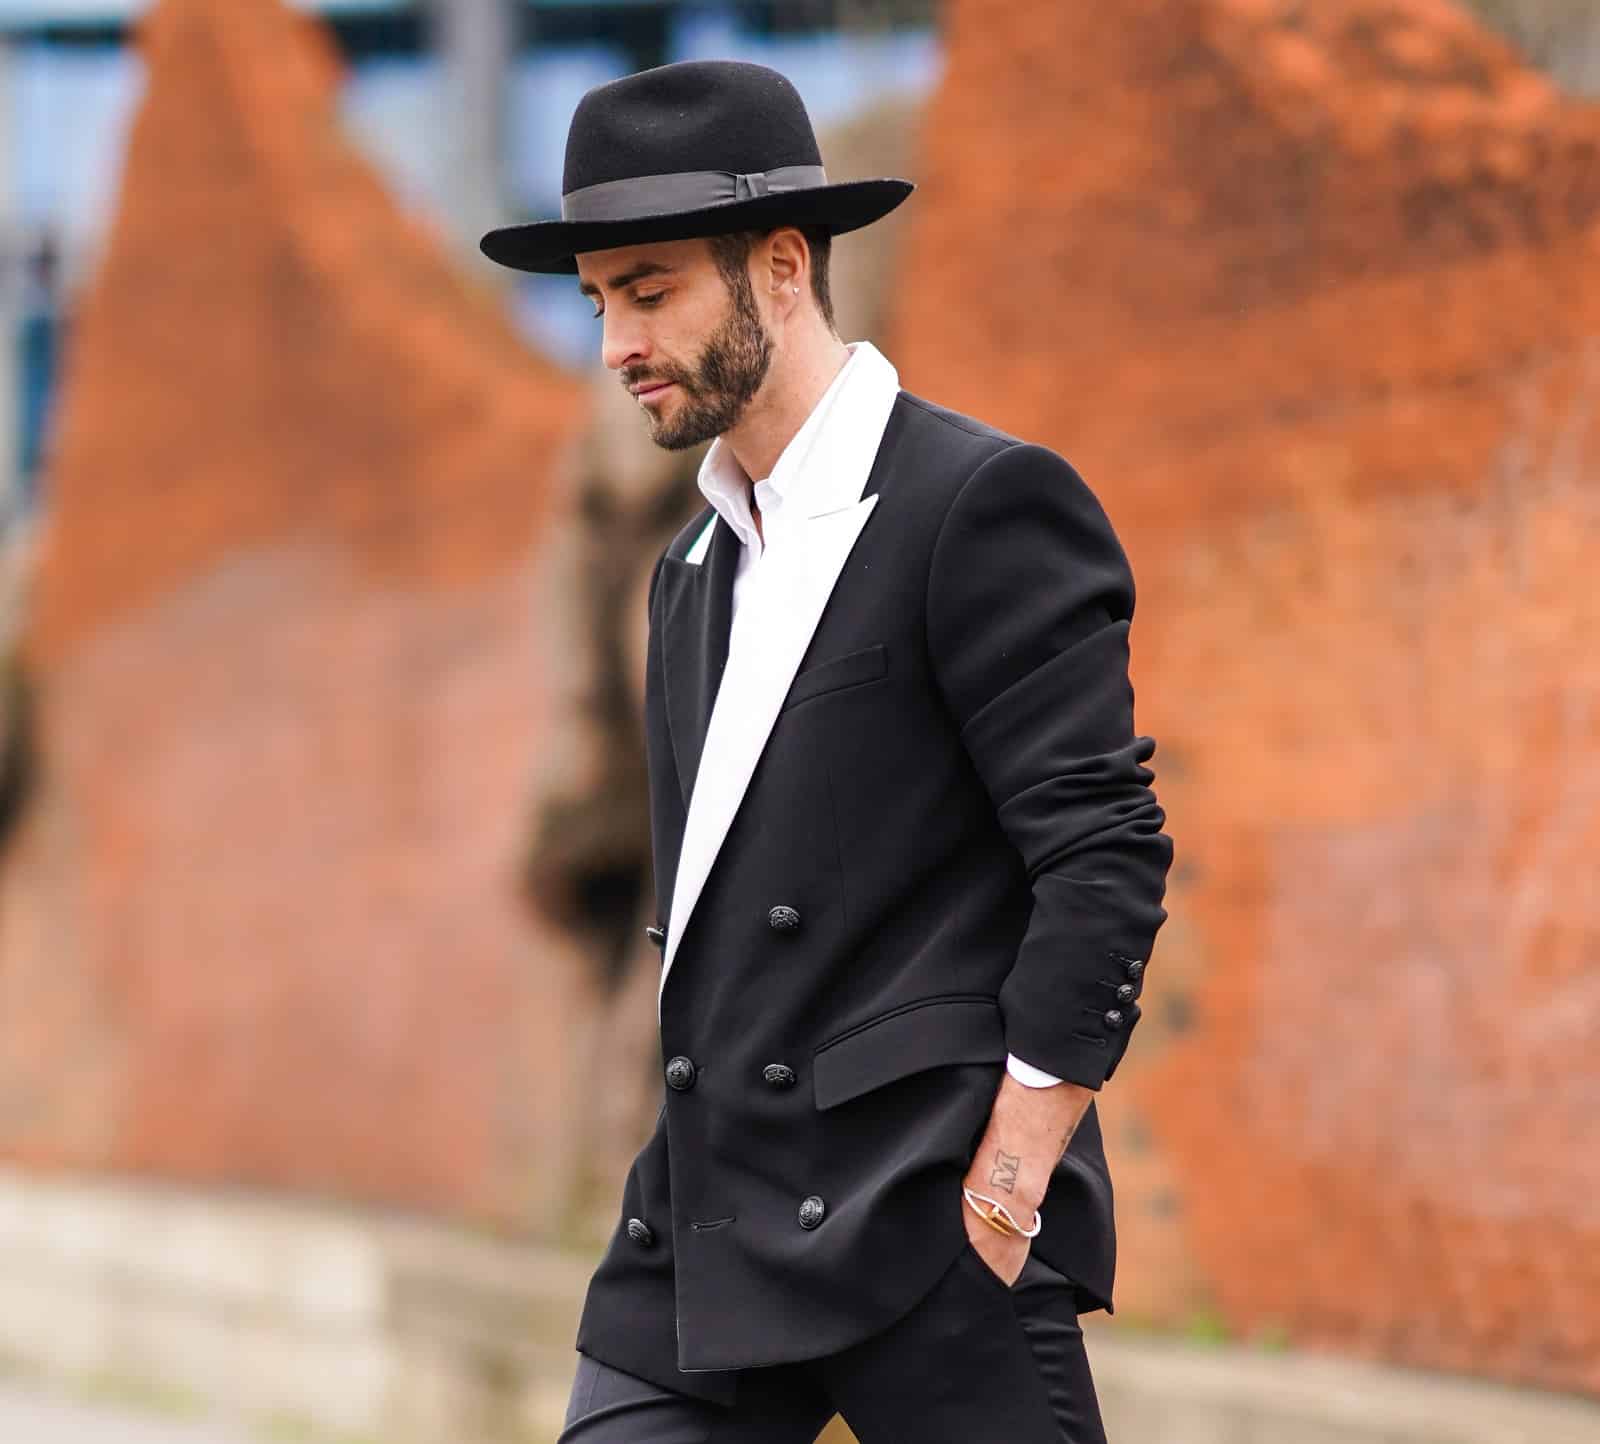 What should be in every stylish guy’s closet? Here are 7 must-have’s